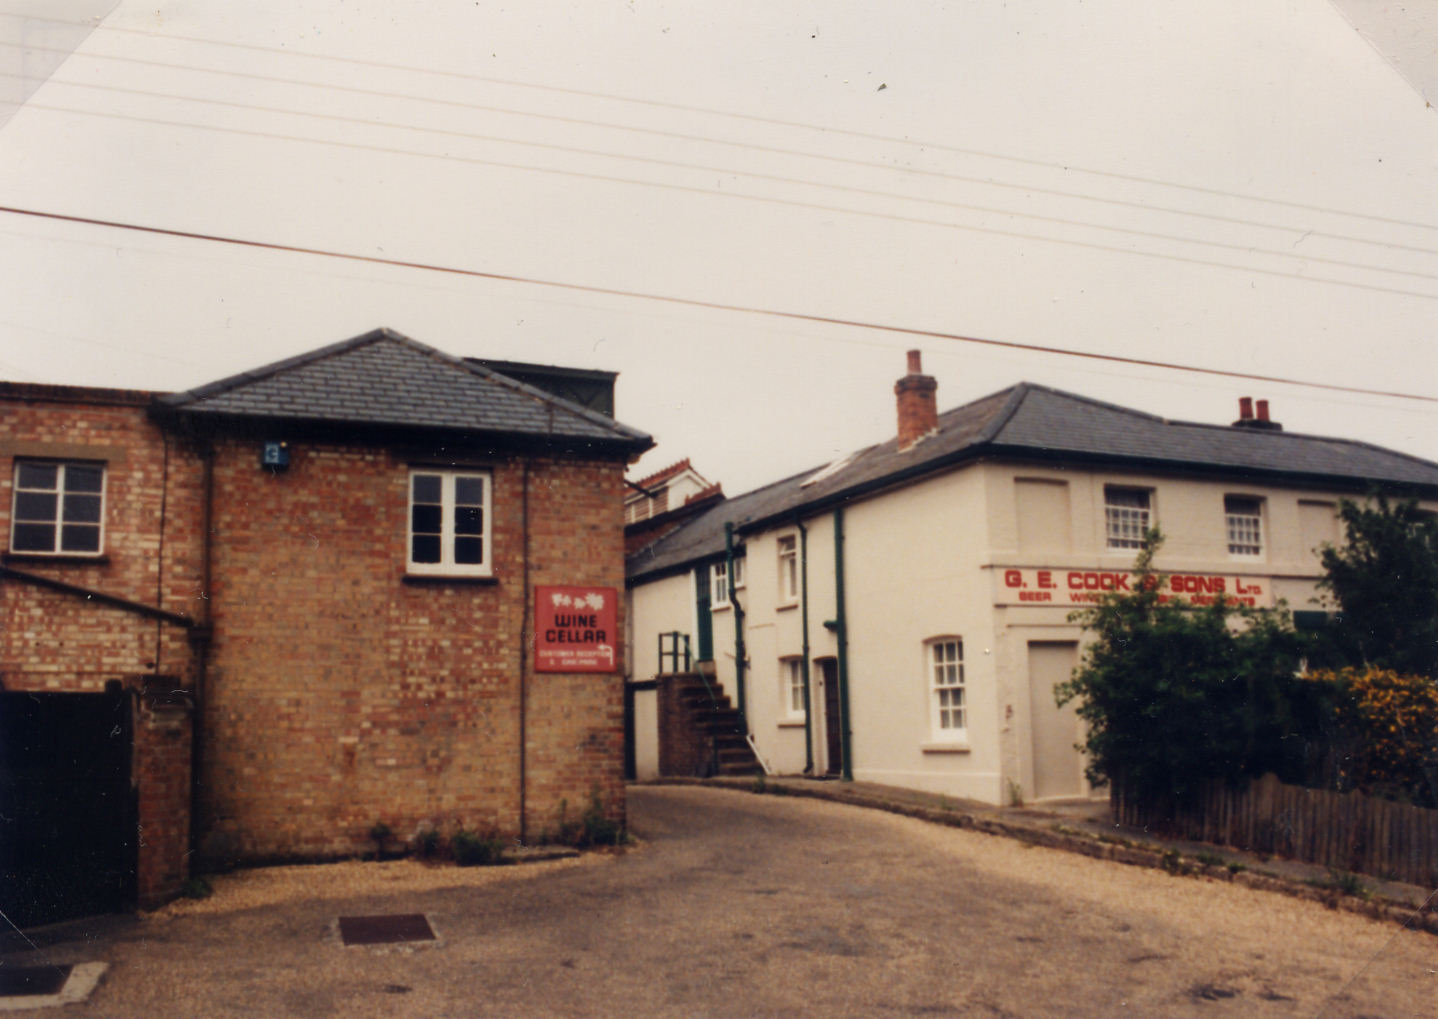 The Halstead brewery